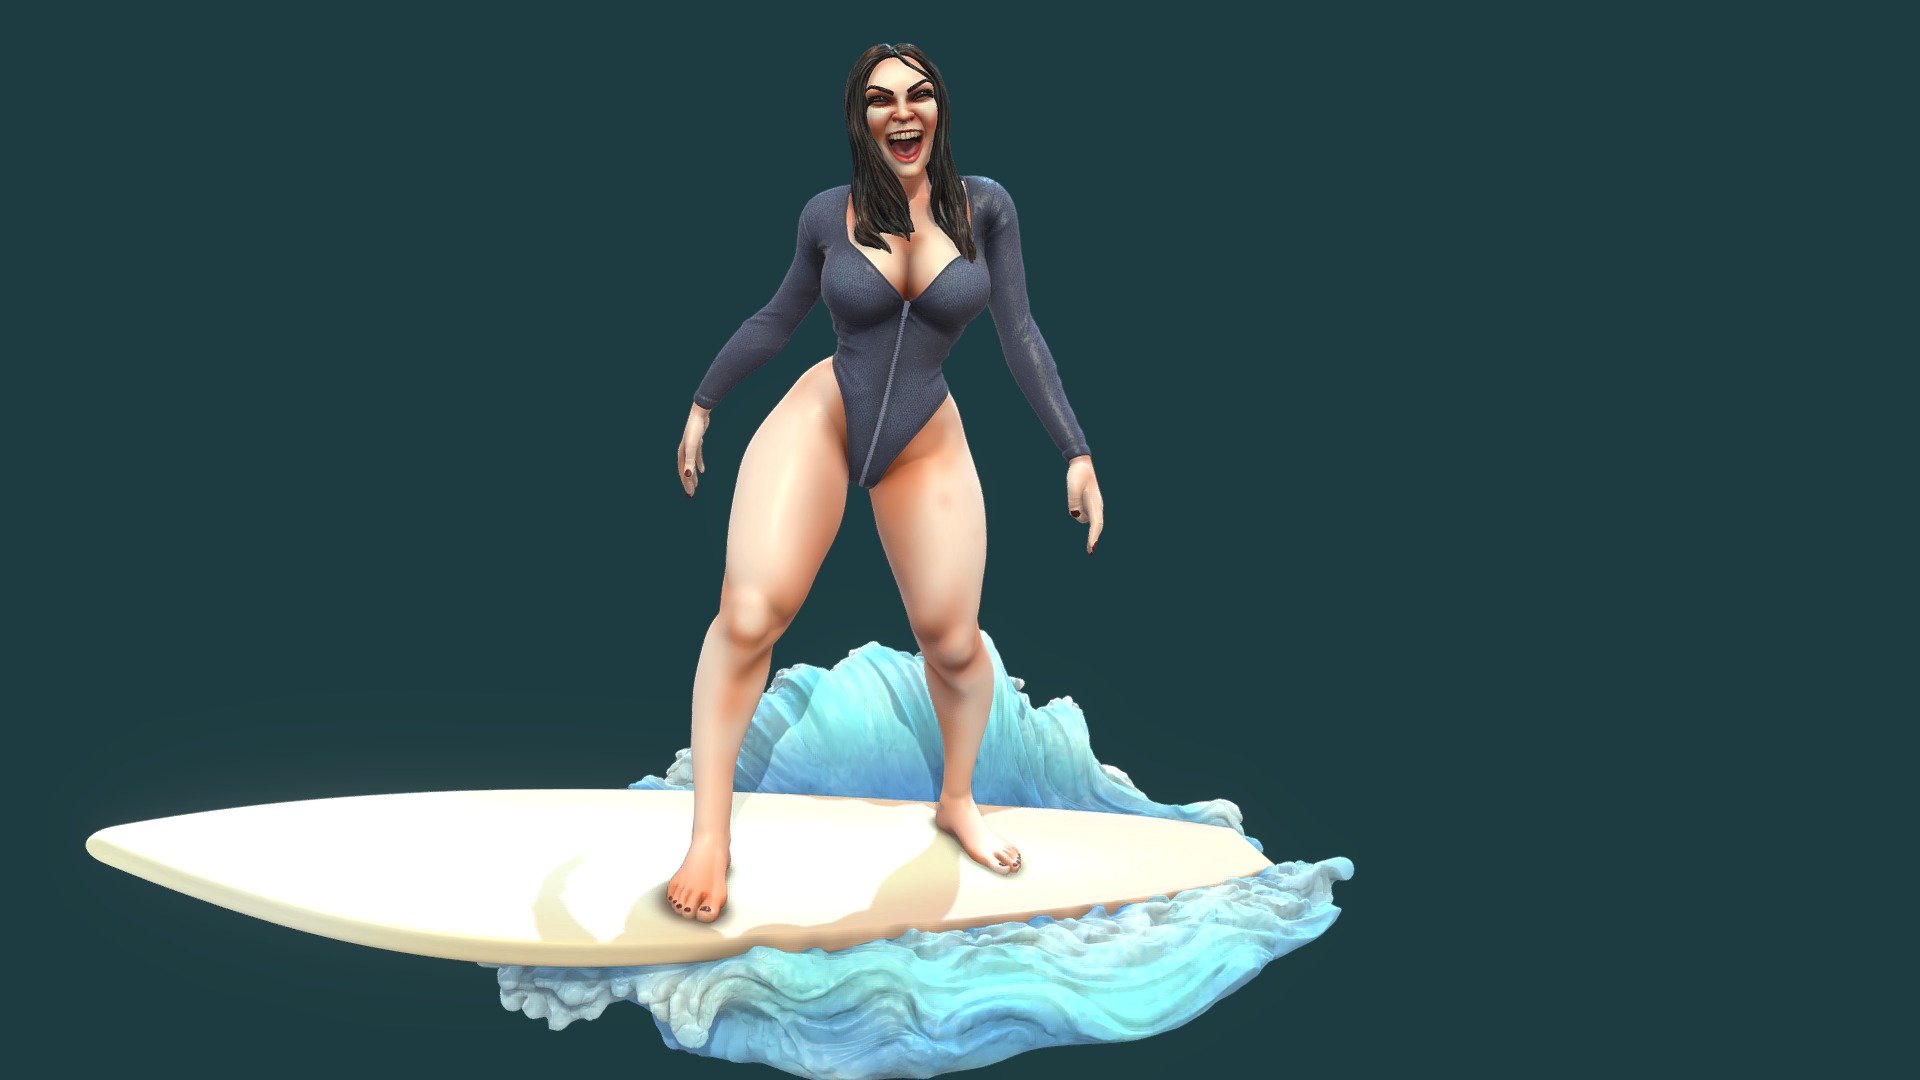 Every month I'm trying to create an original character for my Patreon campaign, targeted at 3d printing. This is Carol, part of my February release. She comes in a NSFW version too, and ready for printing! You can get this model and see other angles in my Patreon page.

patreon.com/torridaminis - Carol - 3D model by Torrida.minis (@torridaminis) 3d model